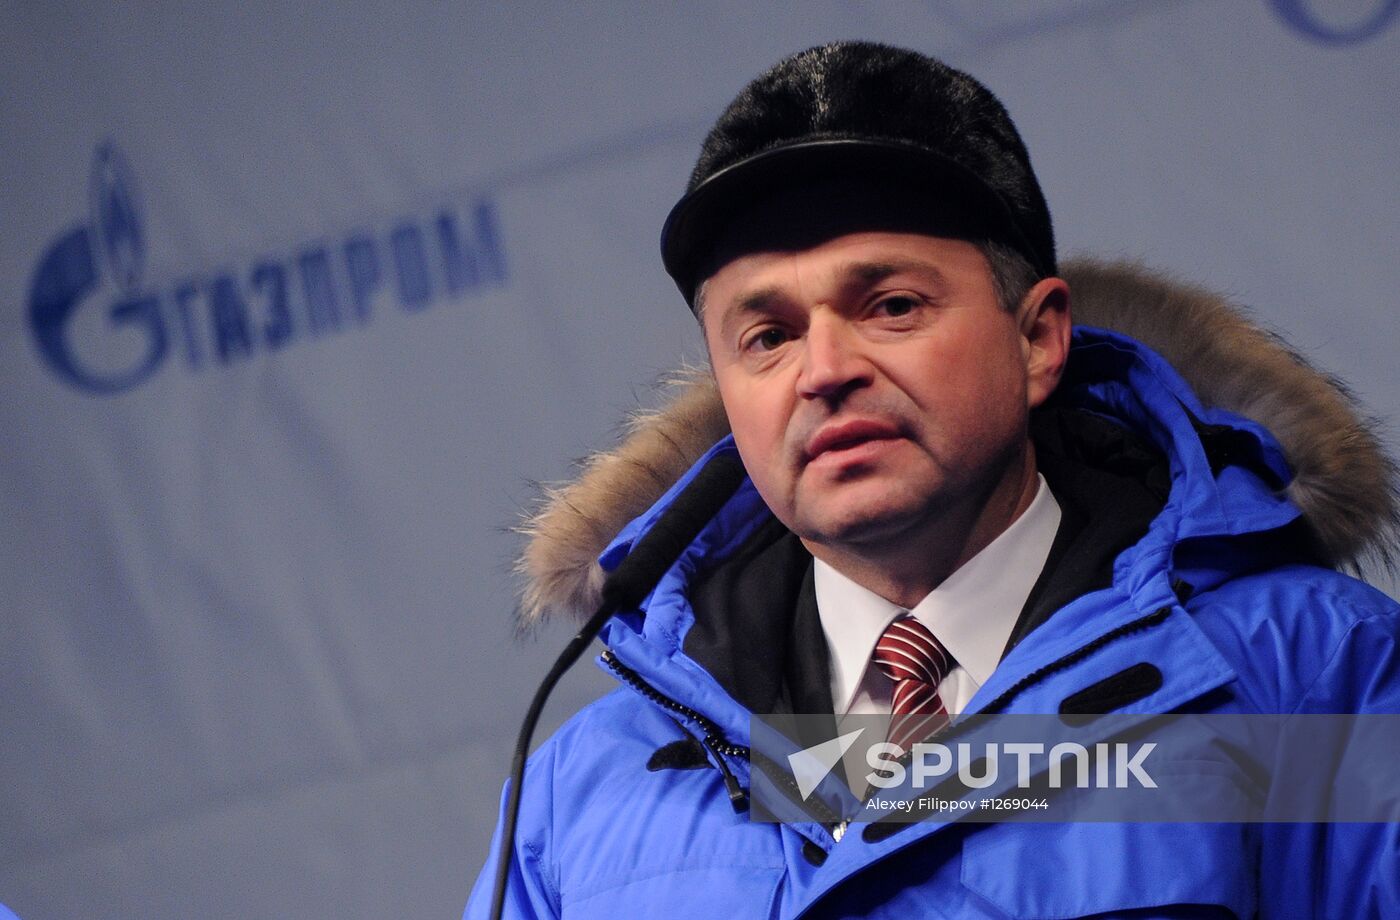 Launch of operation at Bovanenkovo gas field in Yamal-Nenets AO